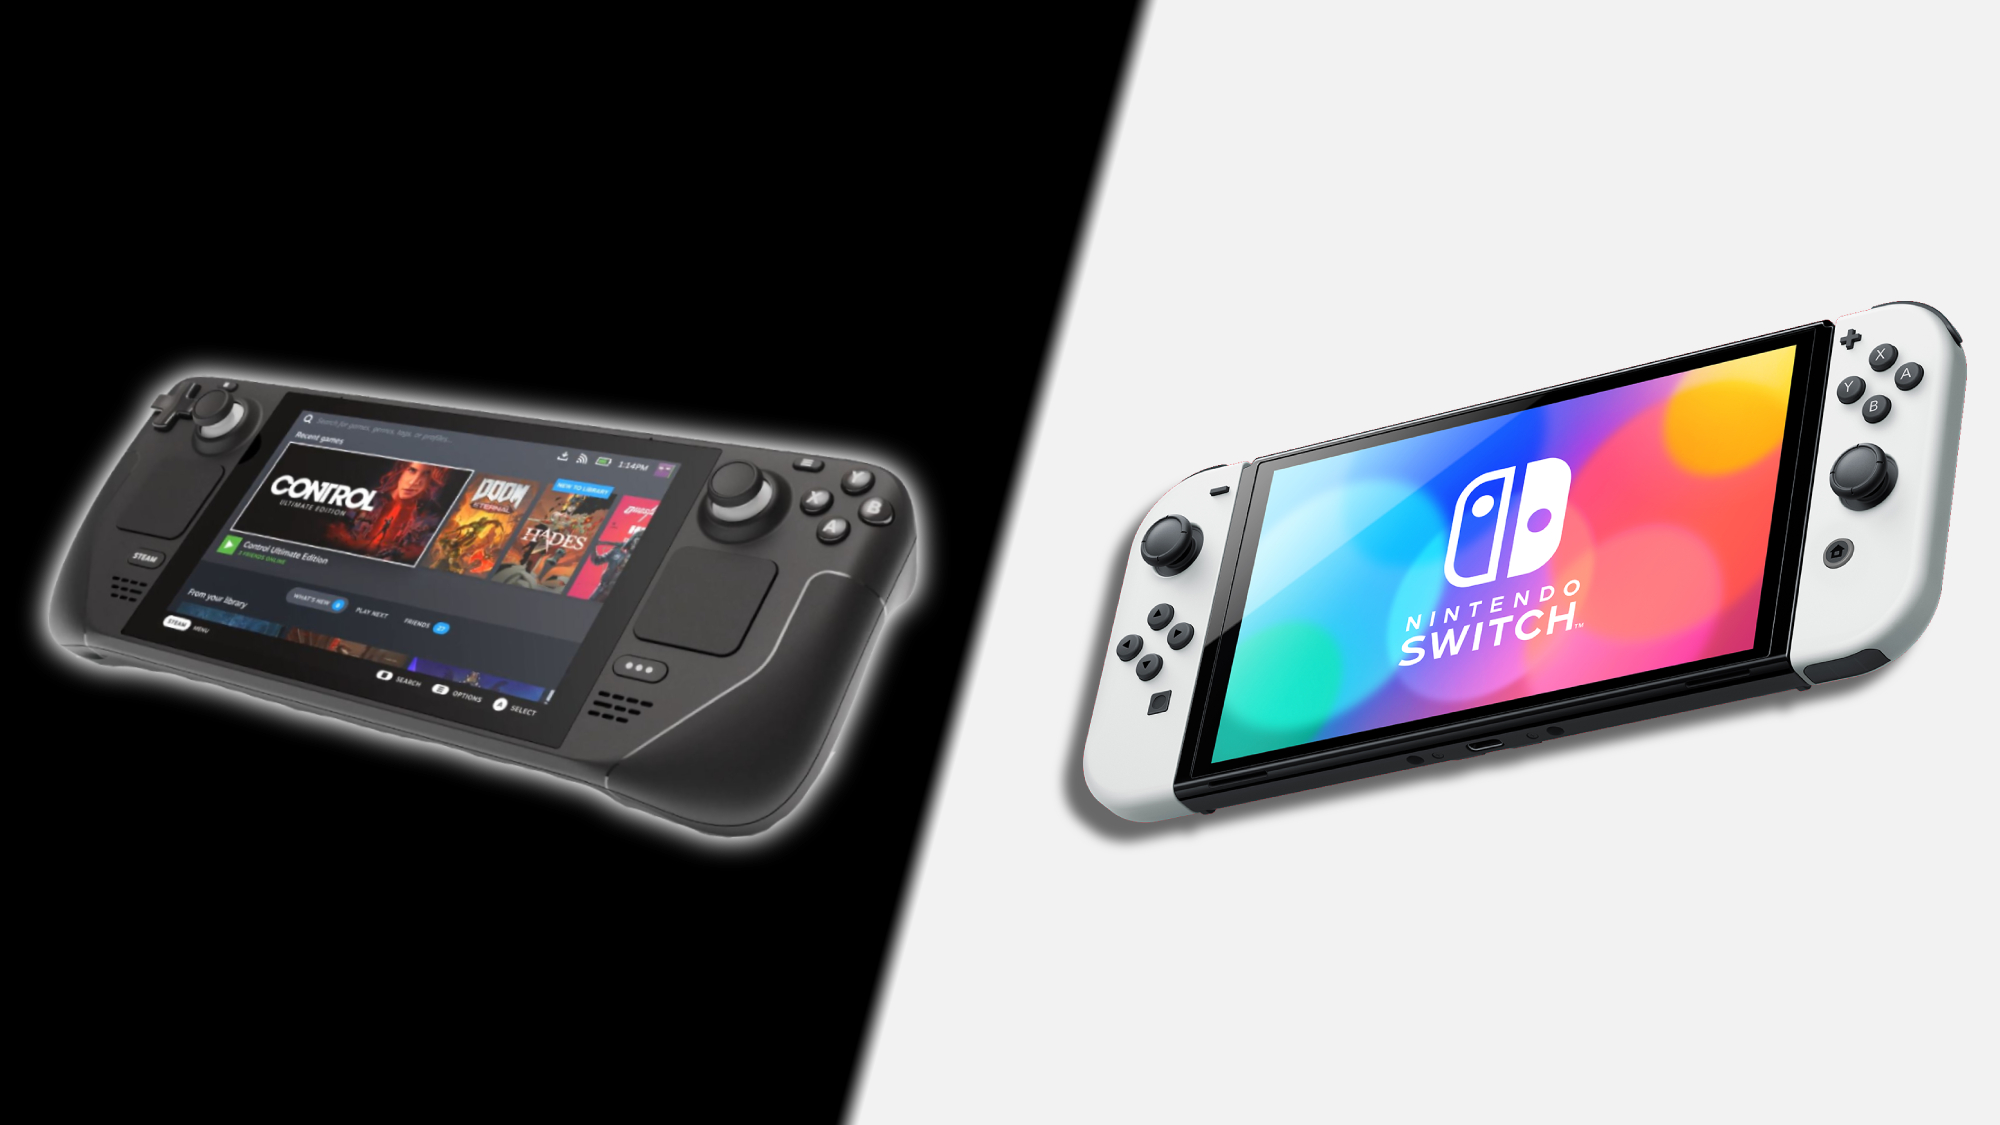 Nintendo Switch Vs. Switch OLED: Which Model Should You Buy?